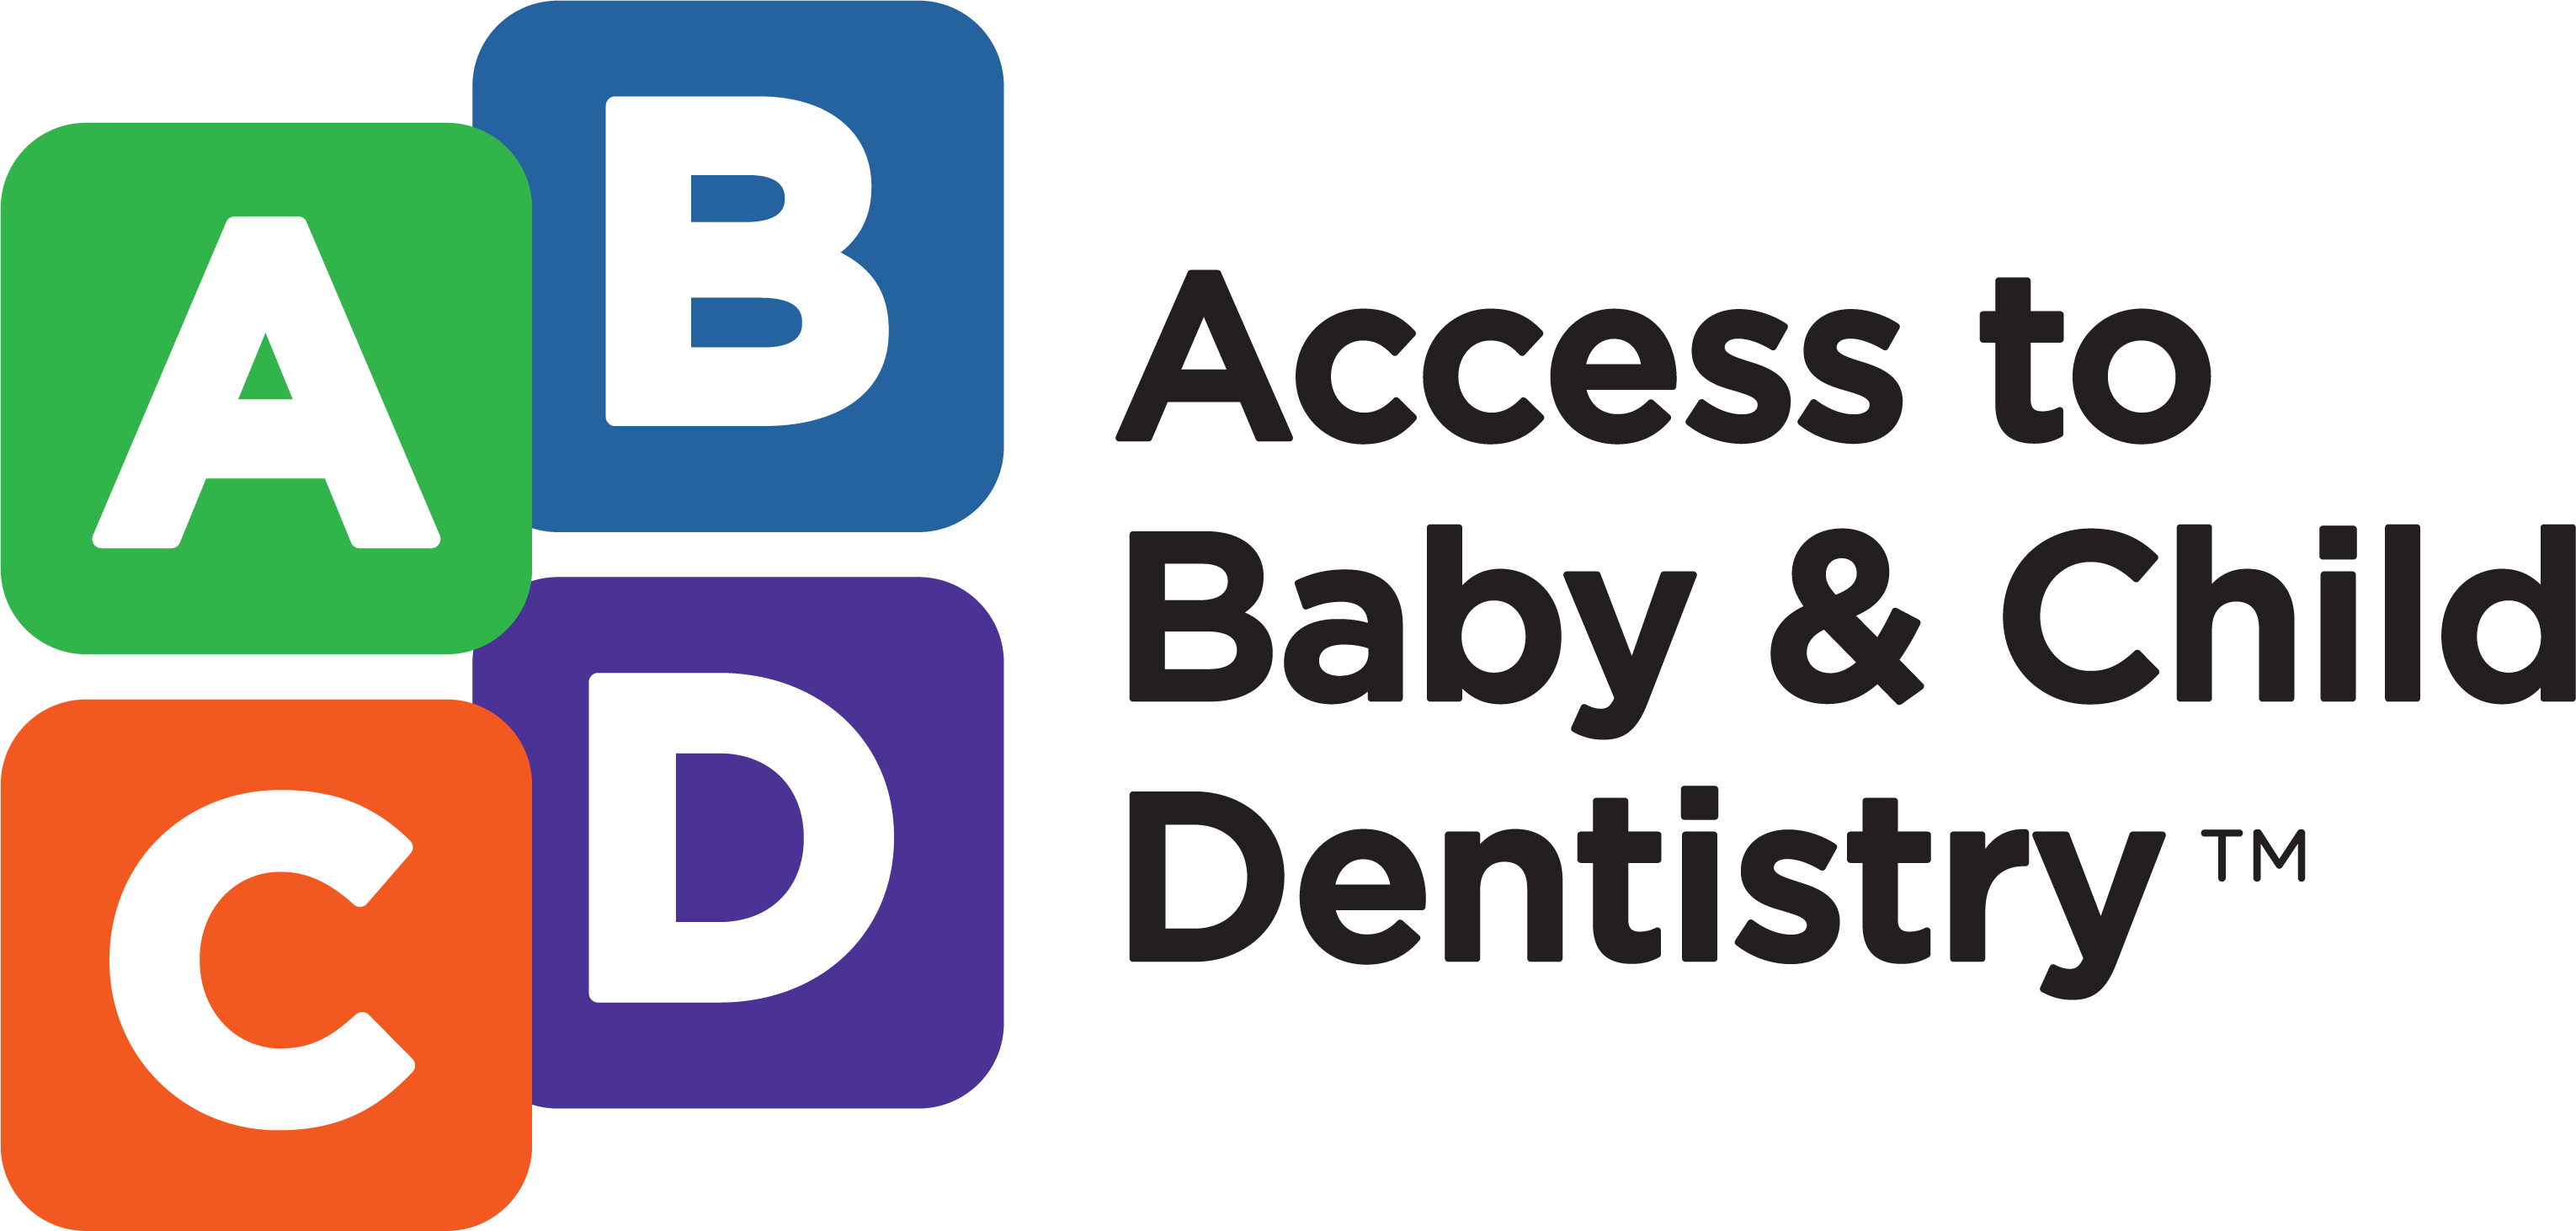 Access to Baby and Child Dentistry logo